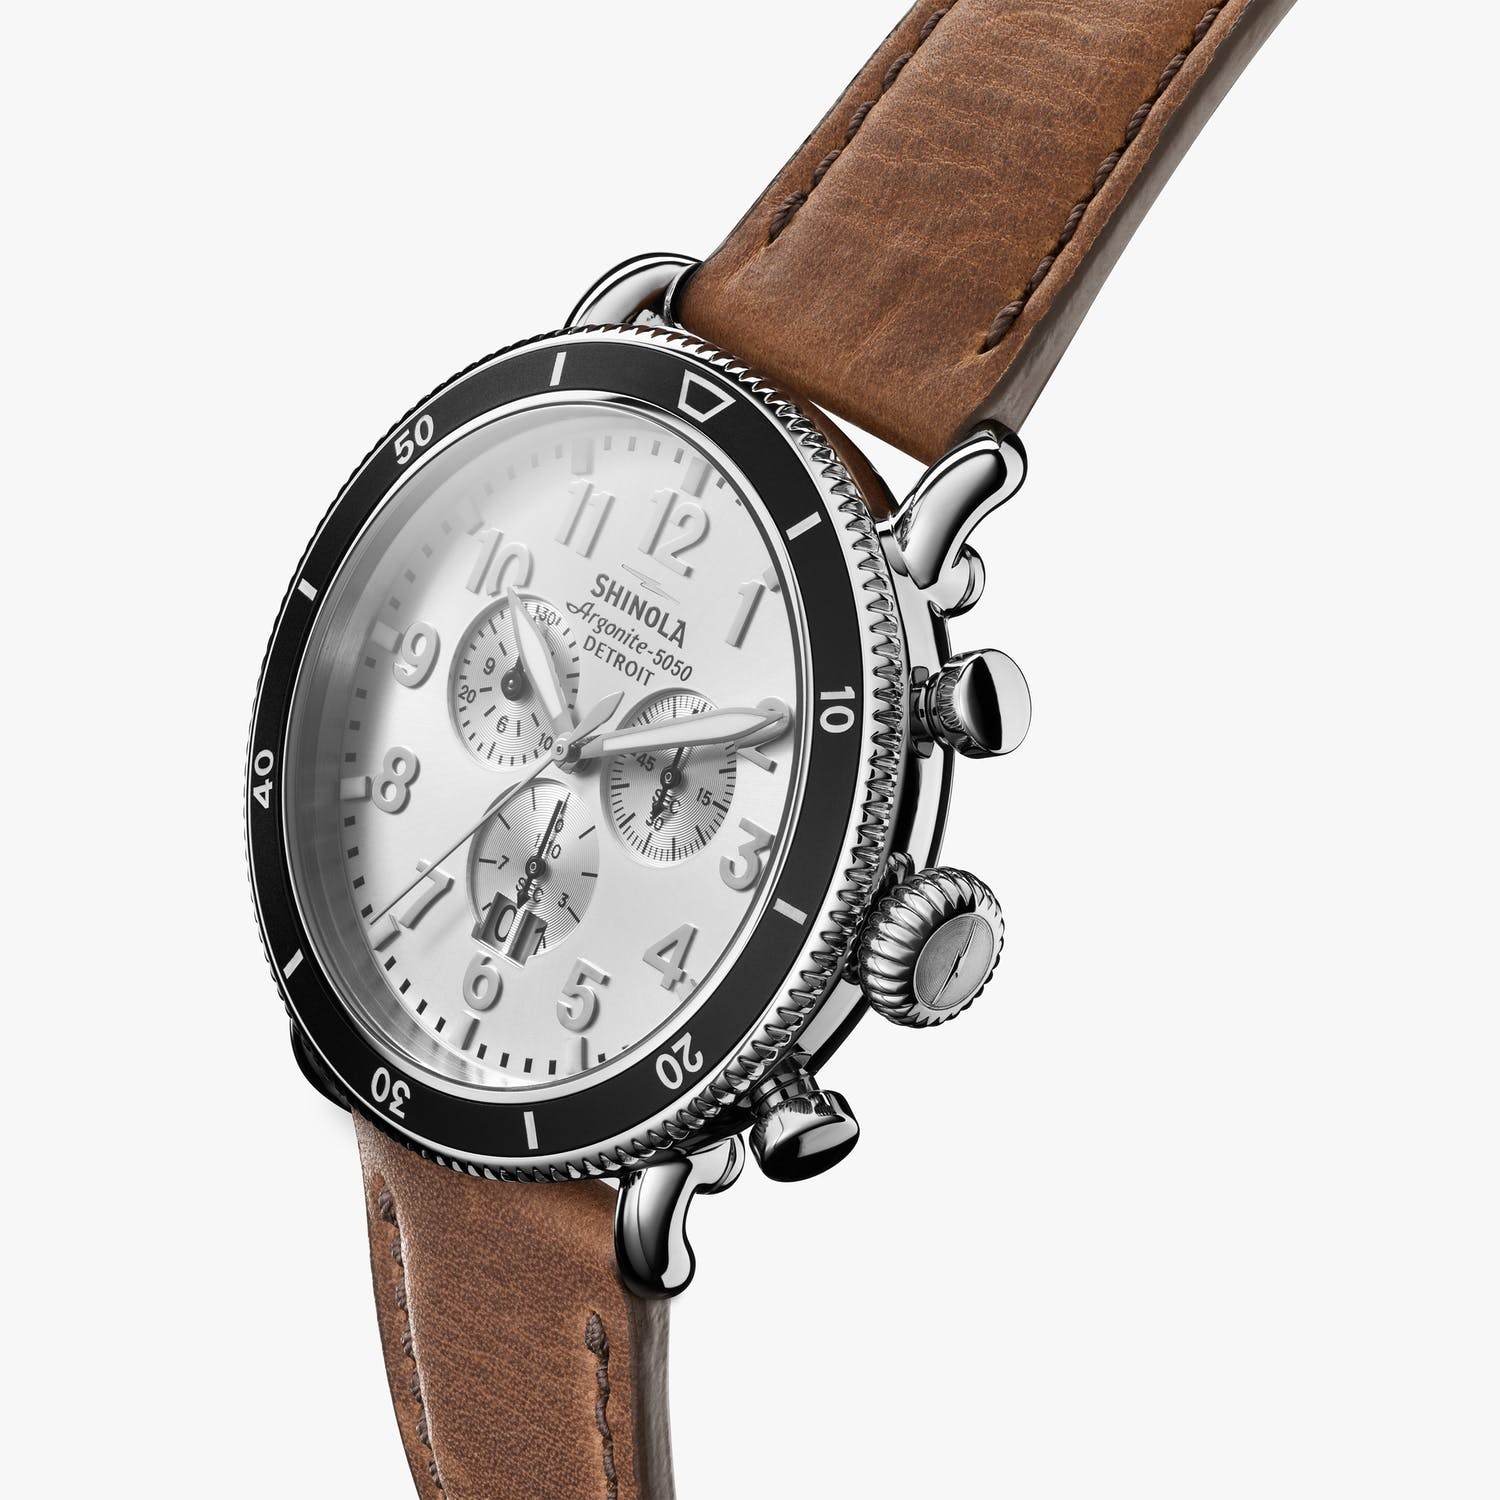 The Runwell Sport Chronograph 48mm-Silver